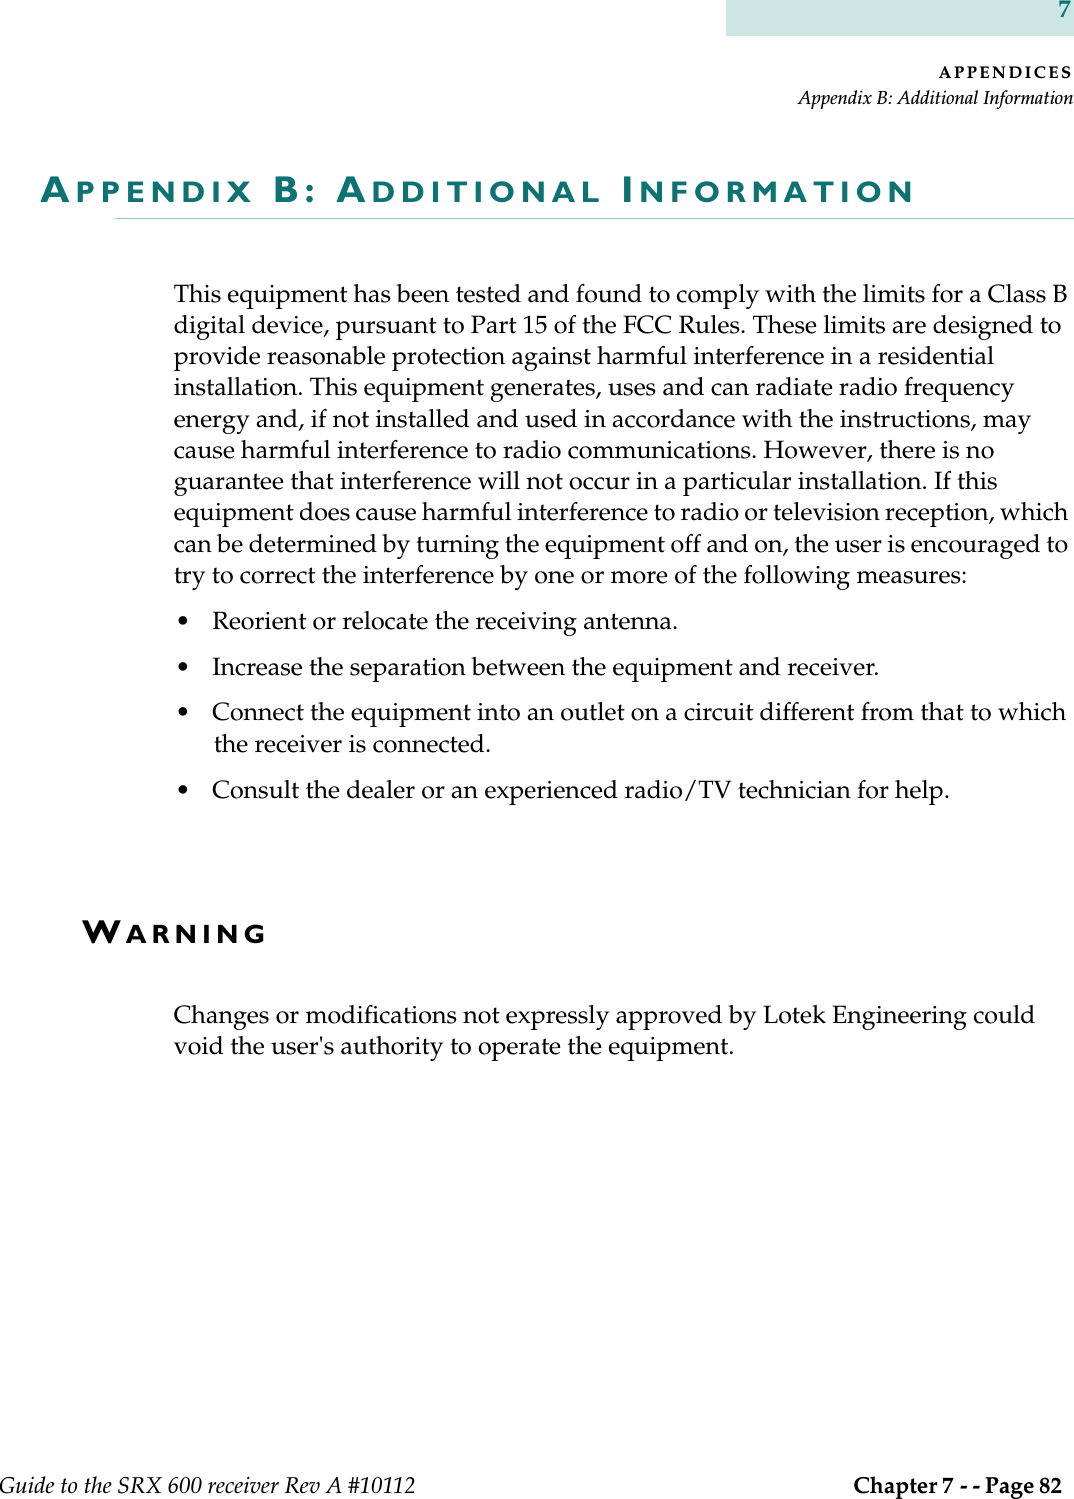 APPENDICESAppendix B: Additional InformationGuide to the SRX 600 receiver Rev A #10112  Chapter 7 - - Page 82 7APPENDIX B: ADDITIONAL INFORMATIONThis equipment has been tested and found to comply with the limits for a Class B digital device, pursuant to Part 15 of the FCC Rules. These limits are designed to provide reasonable protection against harmful interference in a residential installation. This equipment generates, uses and can radiate radio frequency energy and, if not installed and used in accordance with the instructions, may cause harmful interference to radio communications. However, there is no guarantee that interference will not occur in a particular installation. If this equipment does cause harmful interference to radio or television reception, which can be determined by turning the equipment off and on, the user is encouraged to try to correct the interference by one or more of the following measures:• Reorient or relocate the receiving antenna.• Increase the separation between the equipment and receiver.• Connect the equipment into an outlet on a circuit different from that to which the receiver is connected.• Consult the dealer or an experienced radio/TV technician for help.WARNINGChanges or modifications not expressly approved by Lotek Engineering could void the user&apos;s authority to operate the equipment.